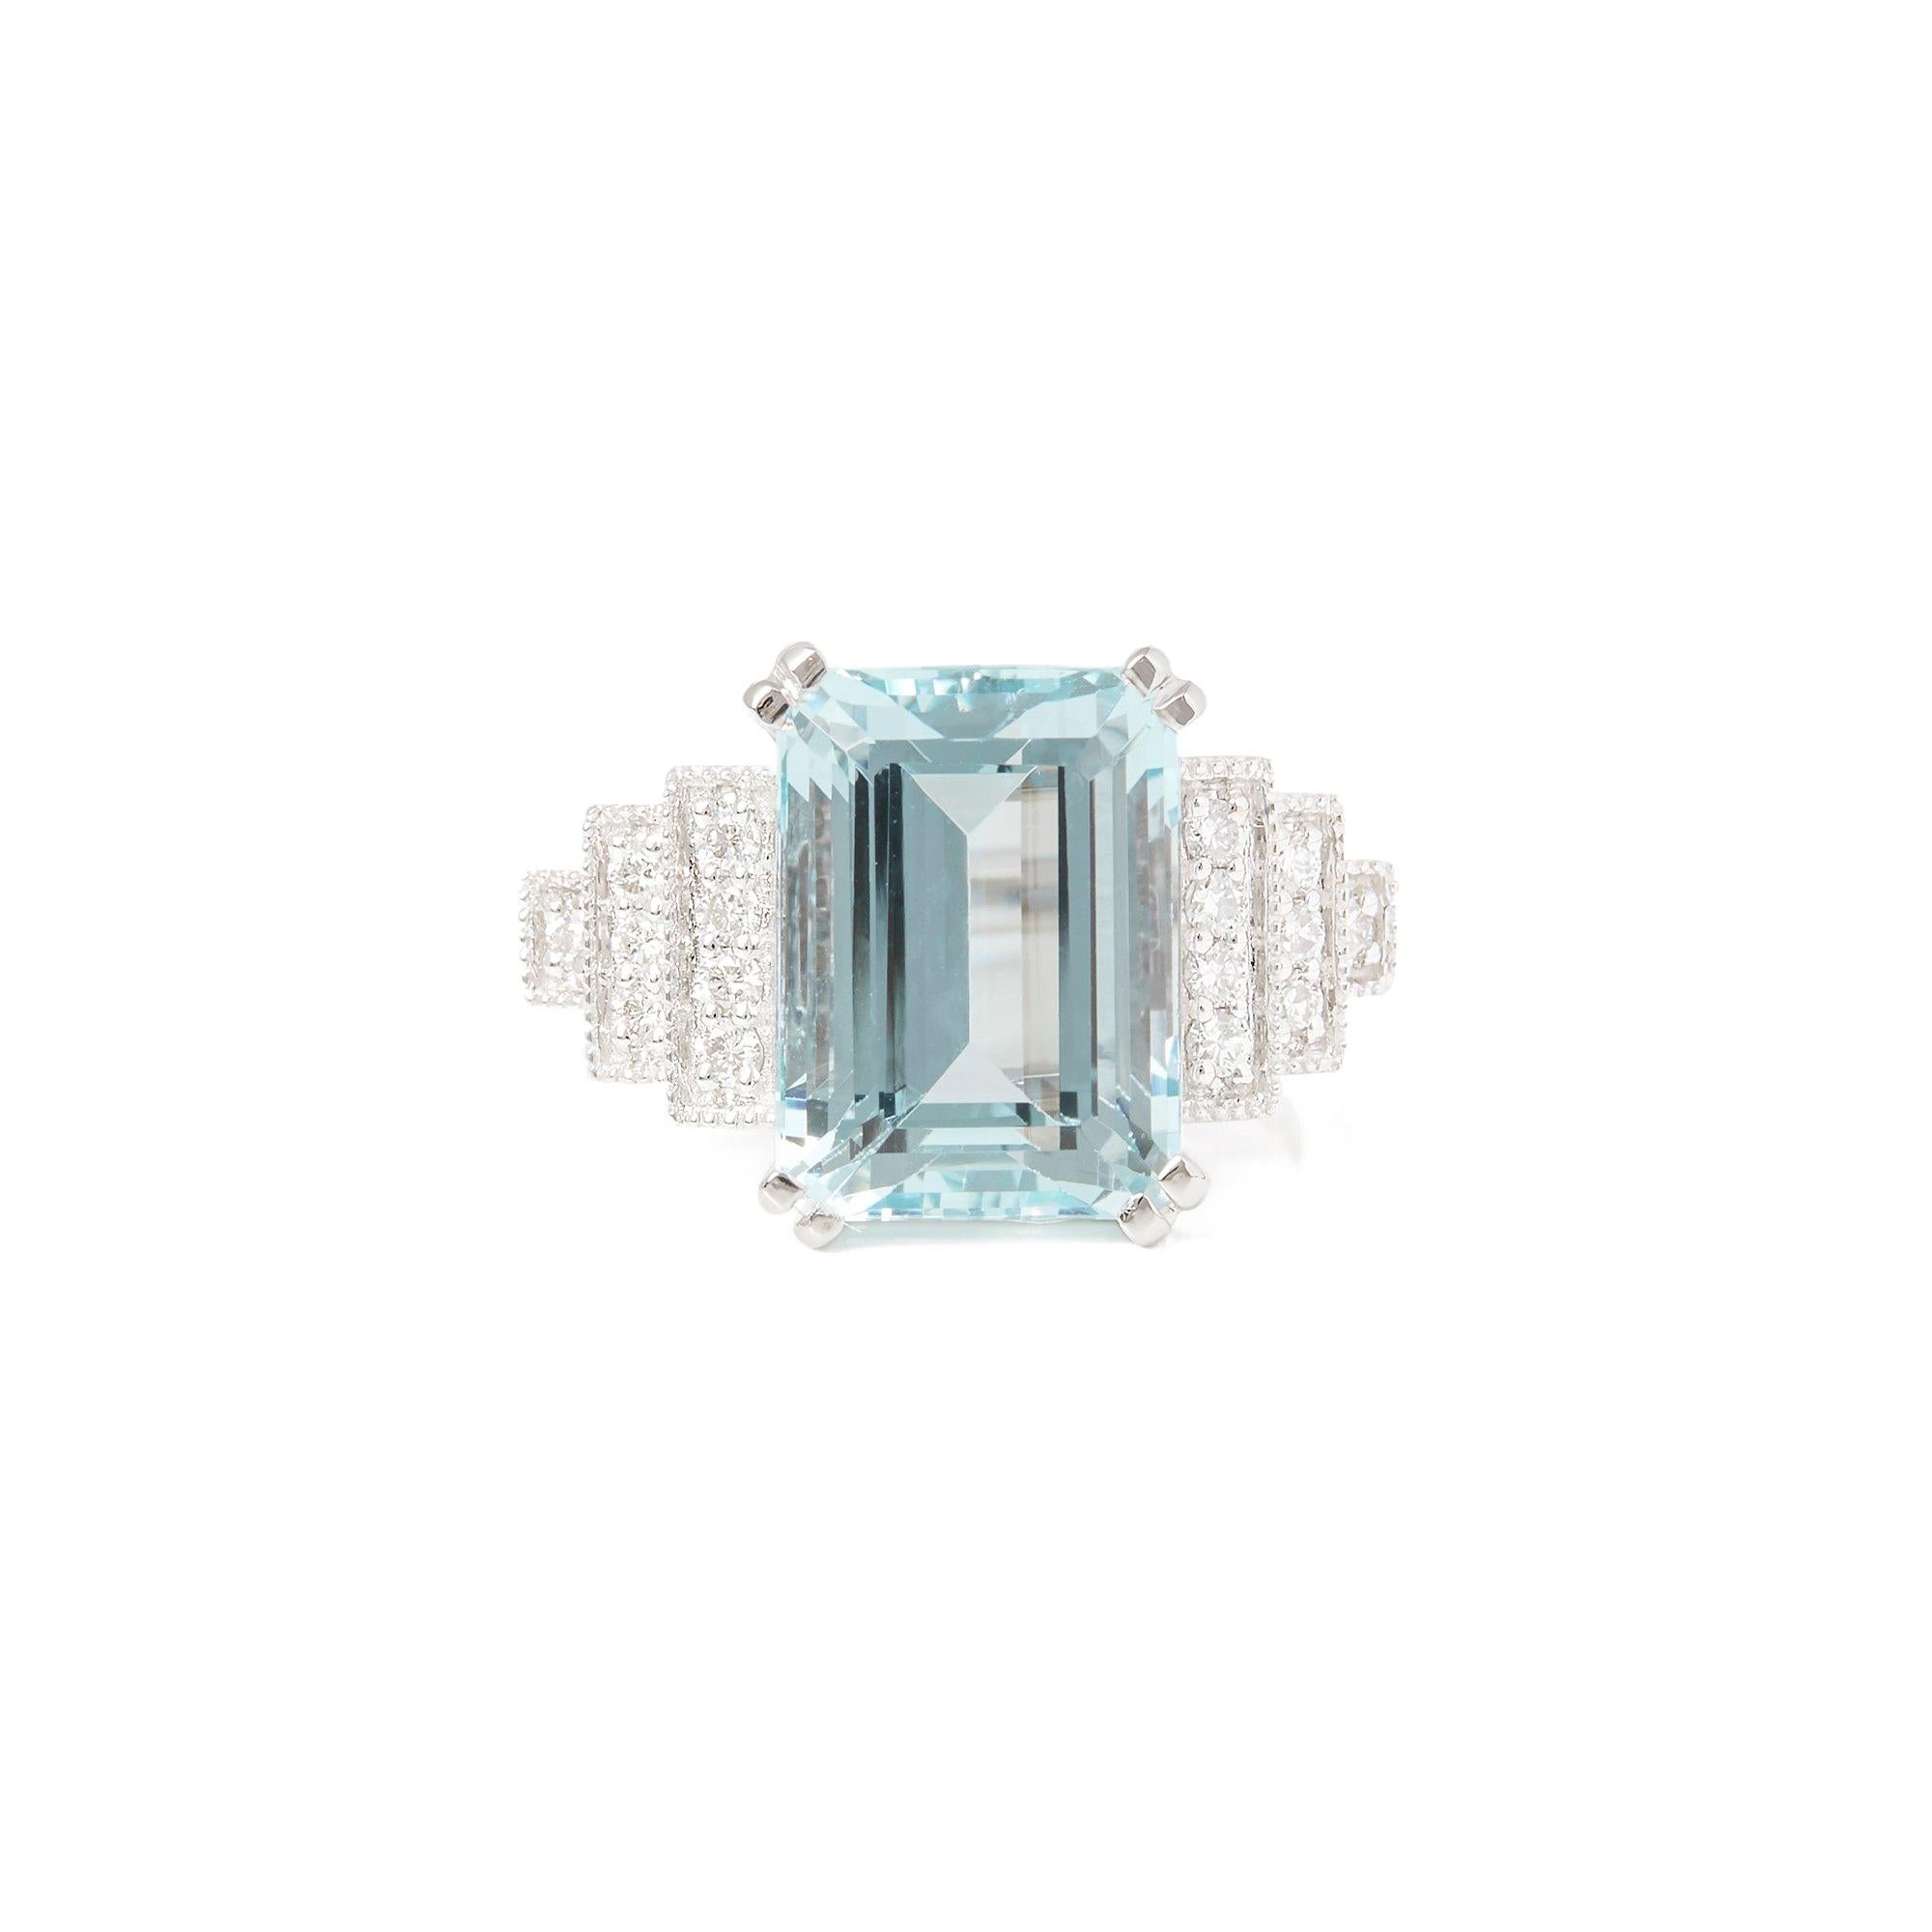 This ring designed by David Jerome is from his private collection and features one Emerald cut Aquamarine totalling 6.63cts sourced in Brazil. Set with round brilliant cut Diamonds totalling 0.24cts. Mounted in an 18k white gold setting. Finger size